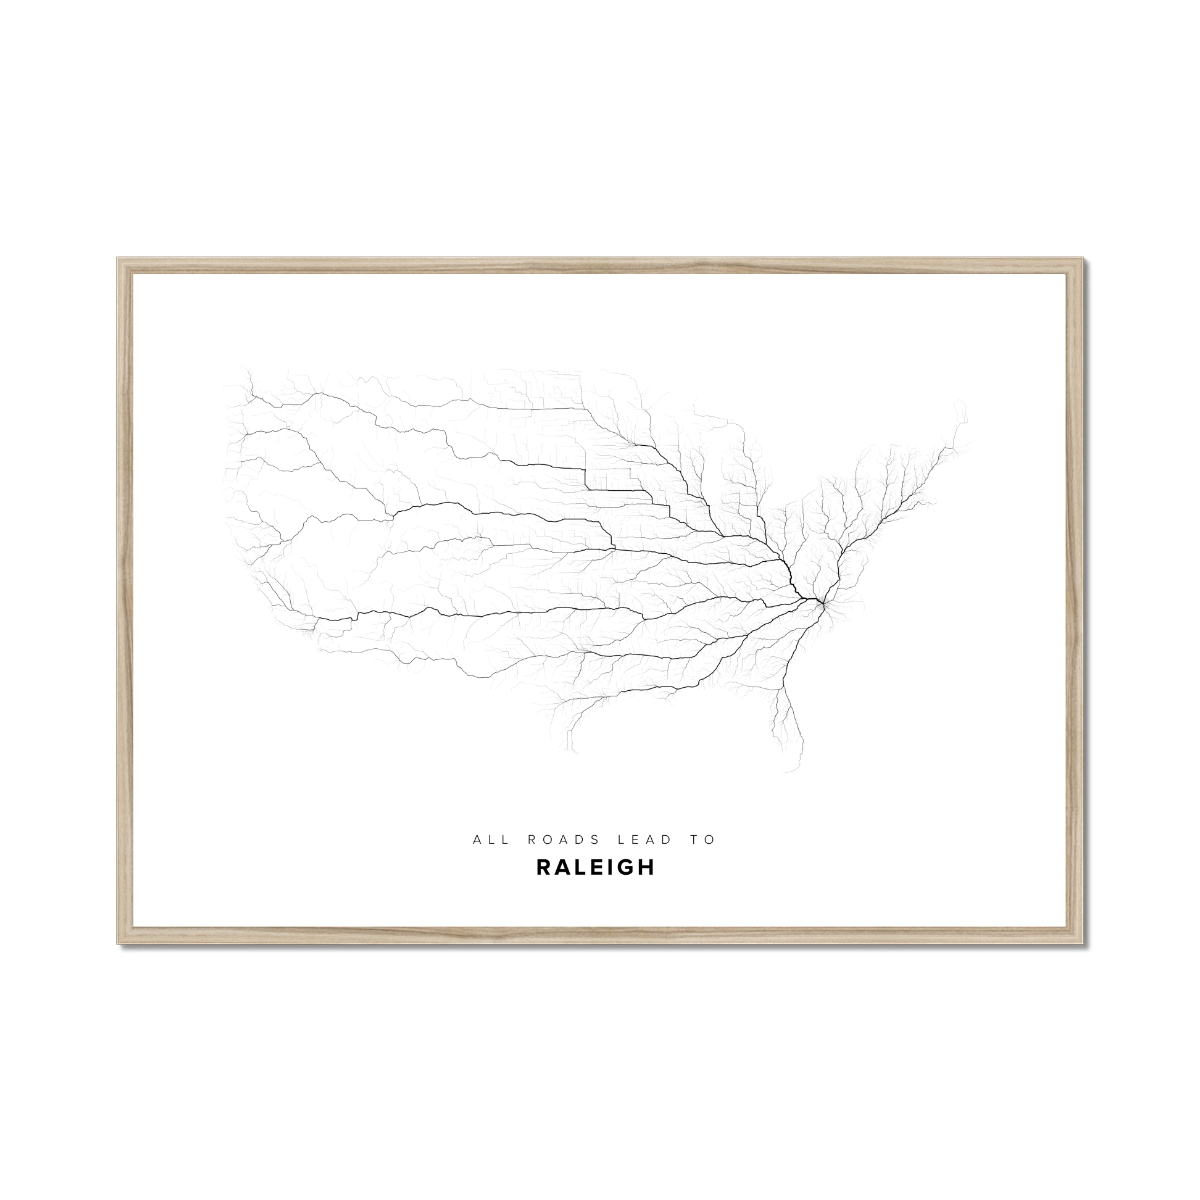 All roads lead to Raleigh (United States of America) Fine Art Map Print